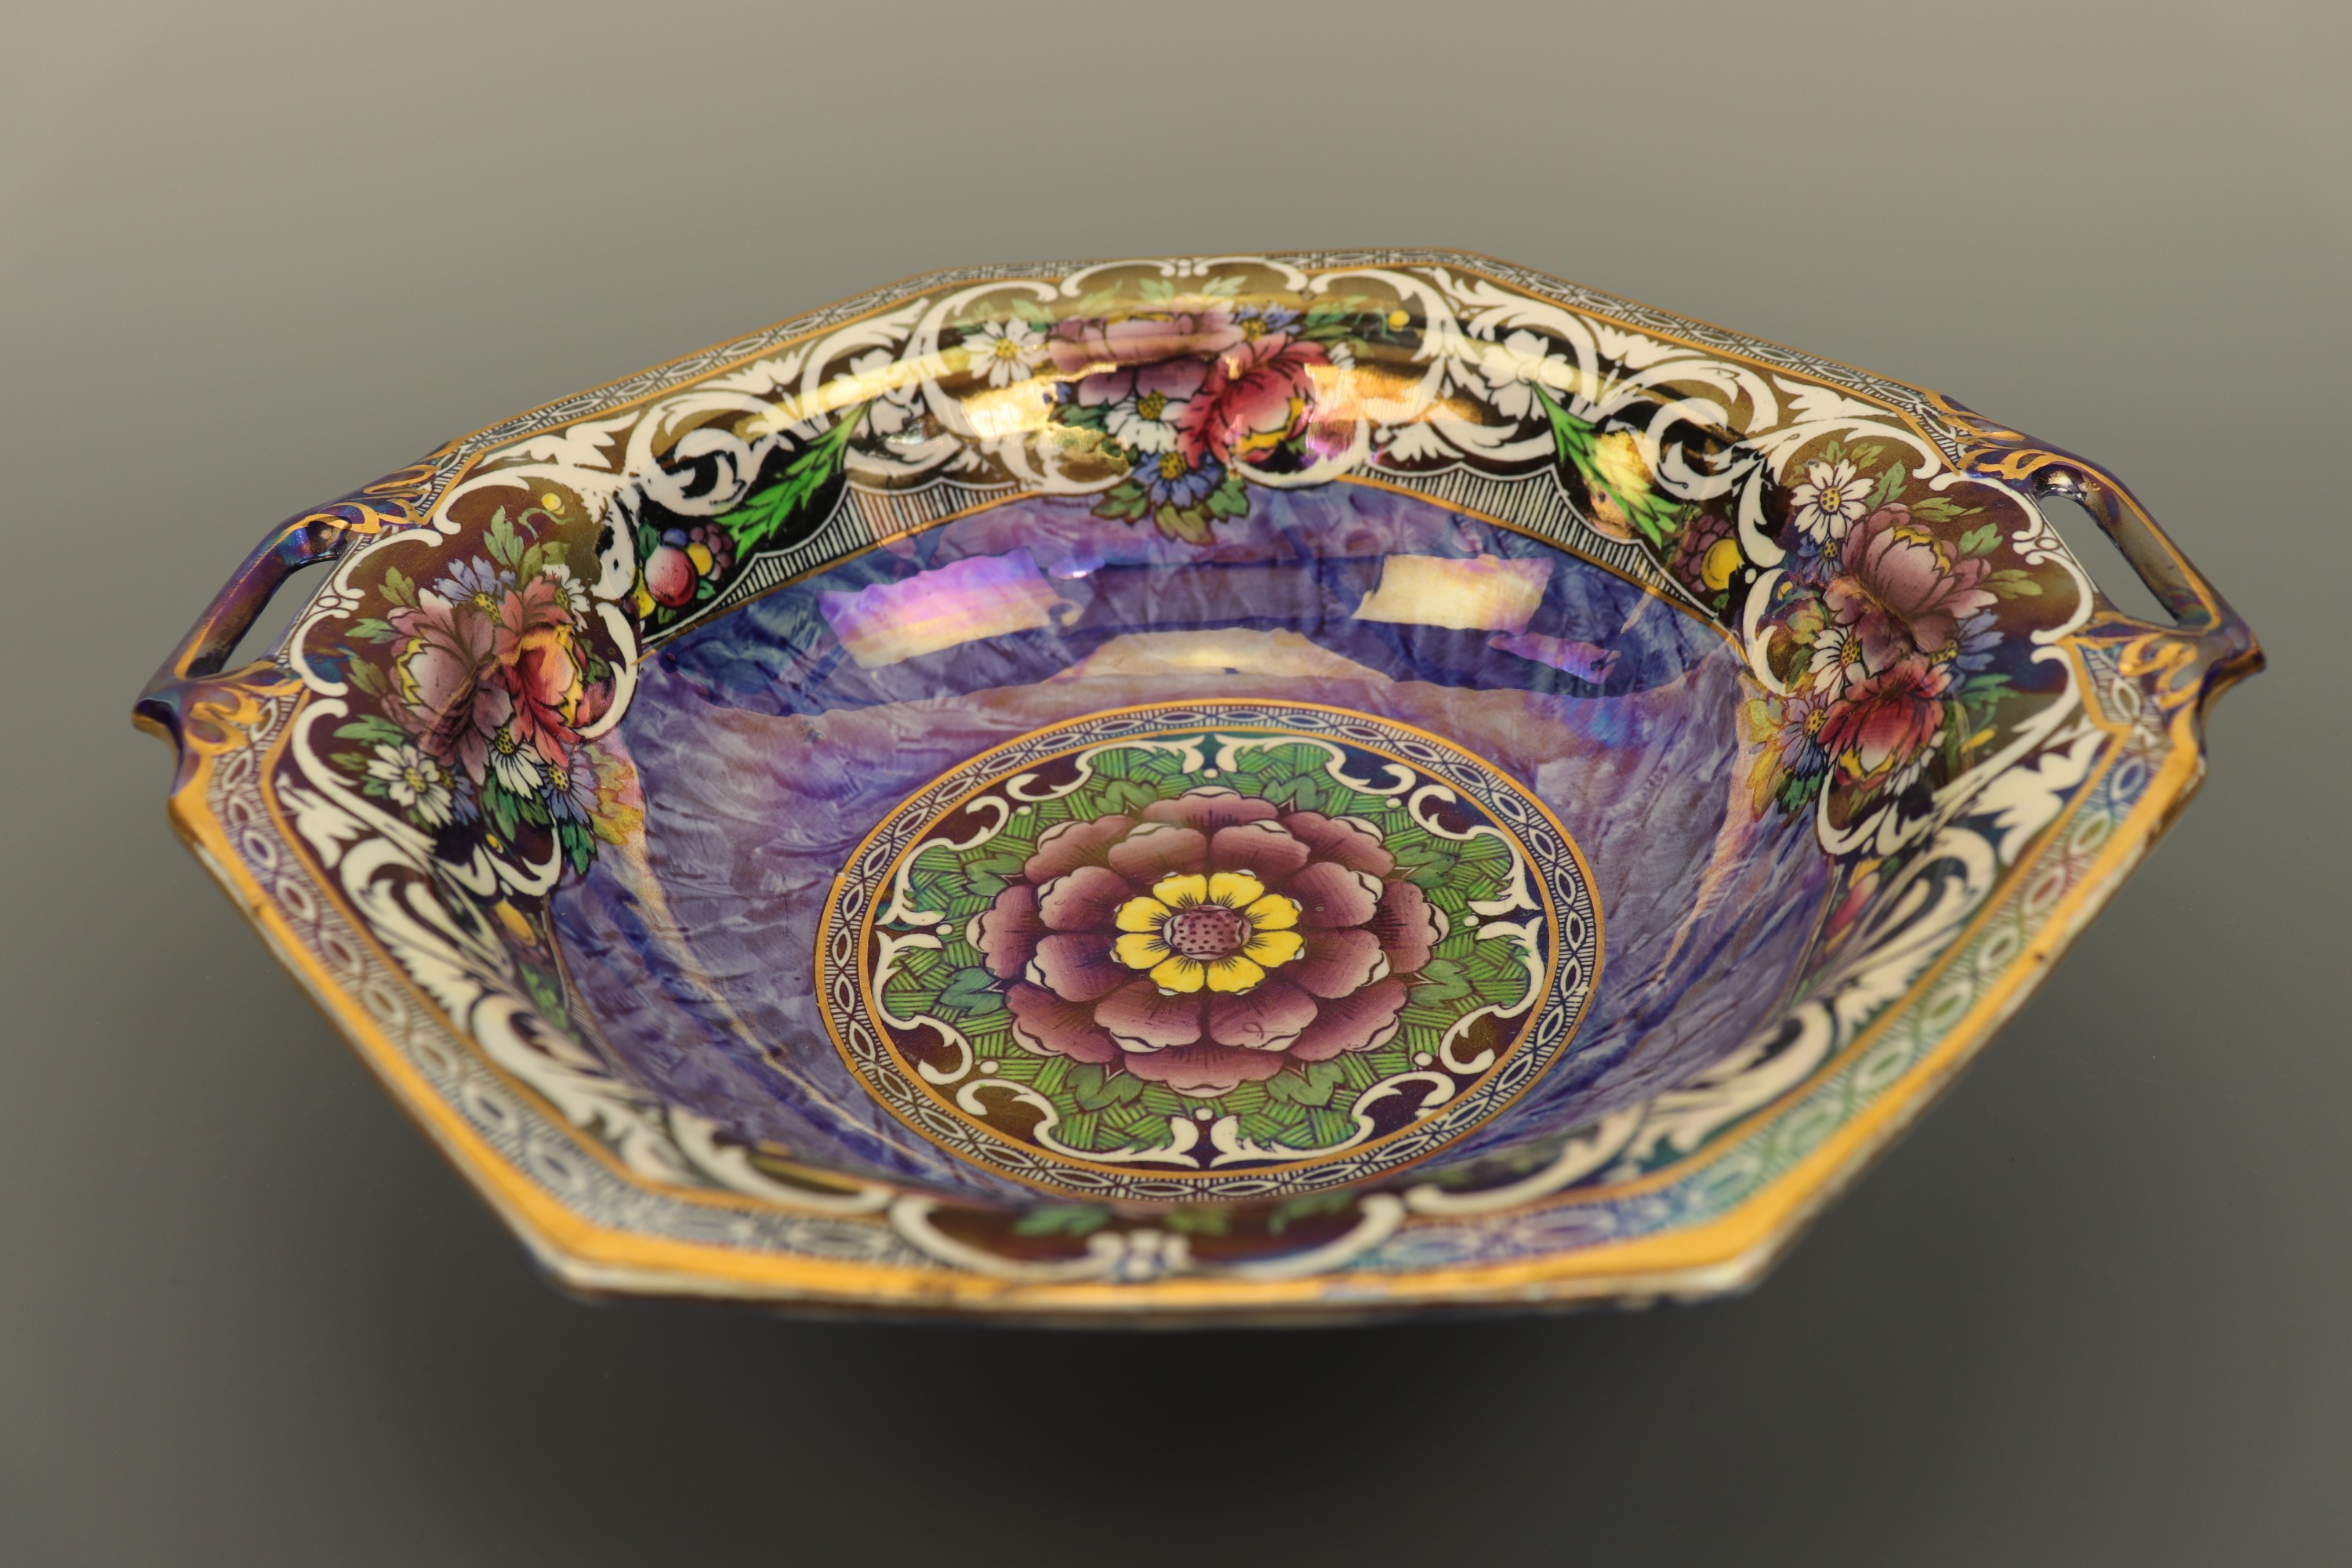 A 1920s Newhall Boumier Ware lustre bowl, 26 cm x 23 cm - Image 3 of 3